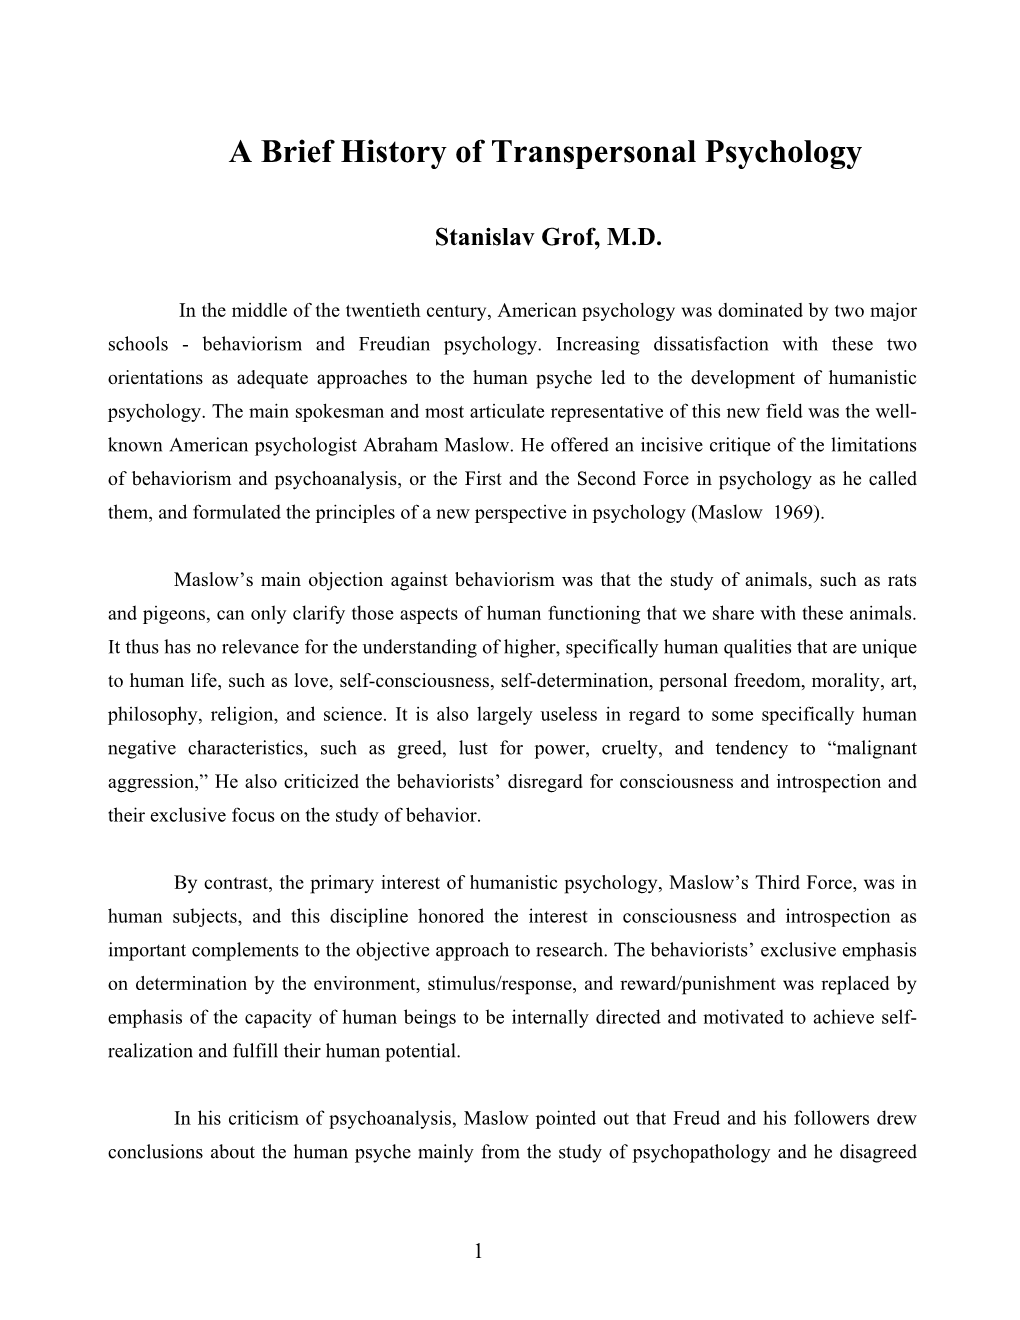 A Brief History of Transpersonal Psychology